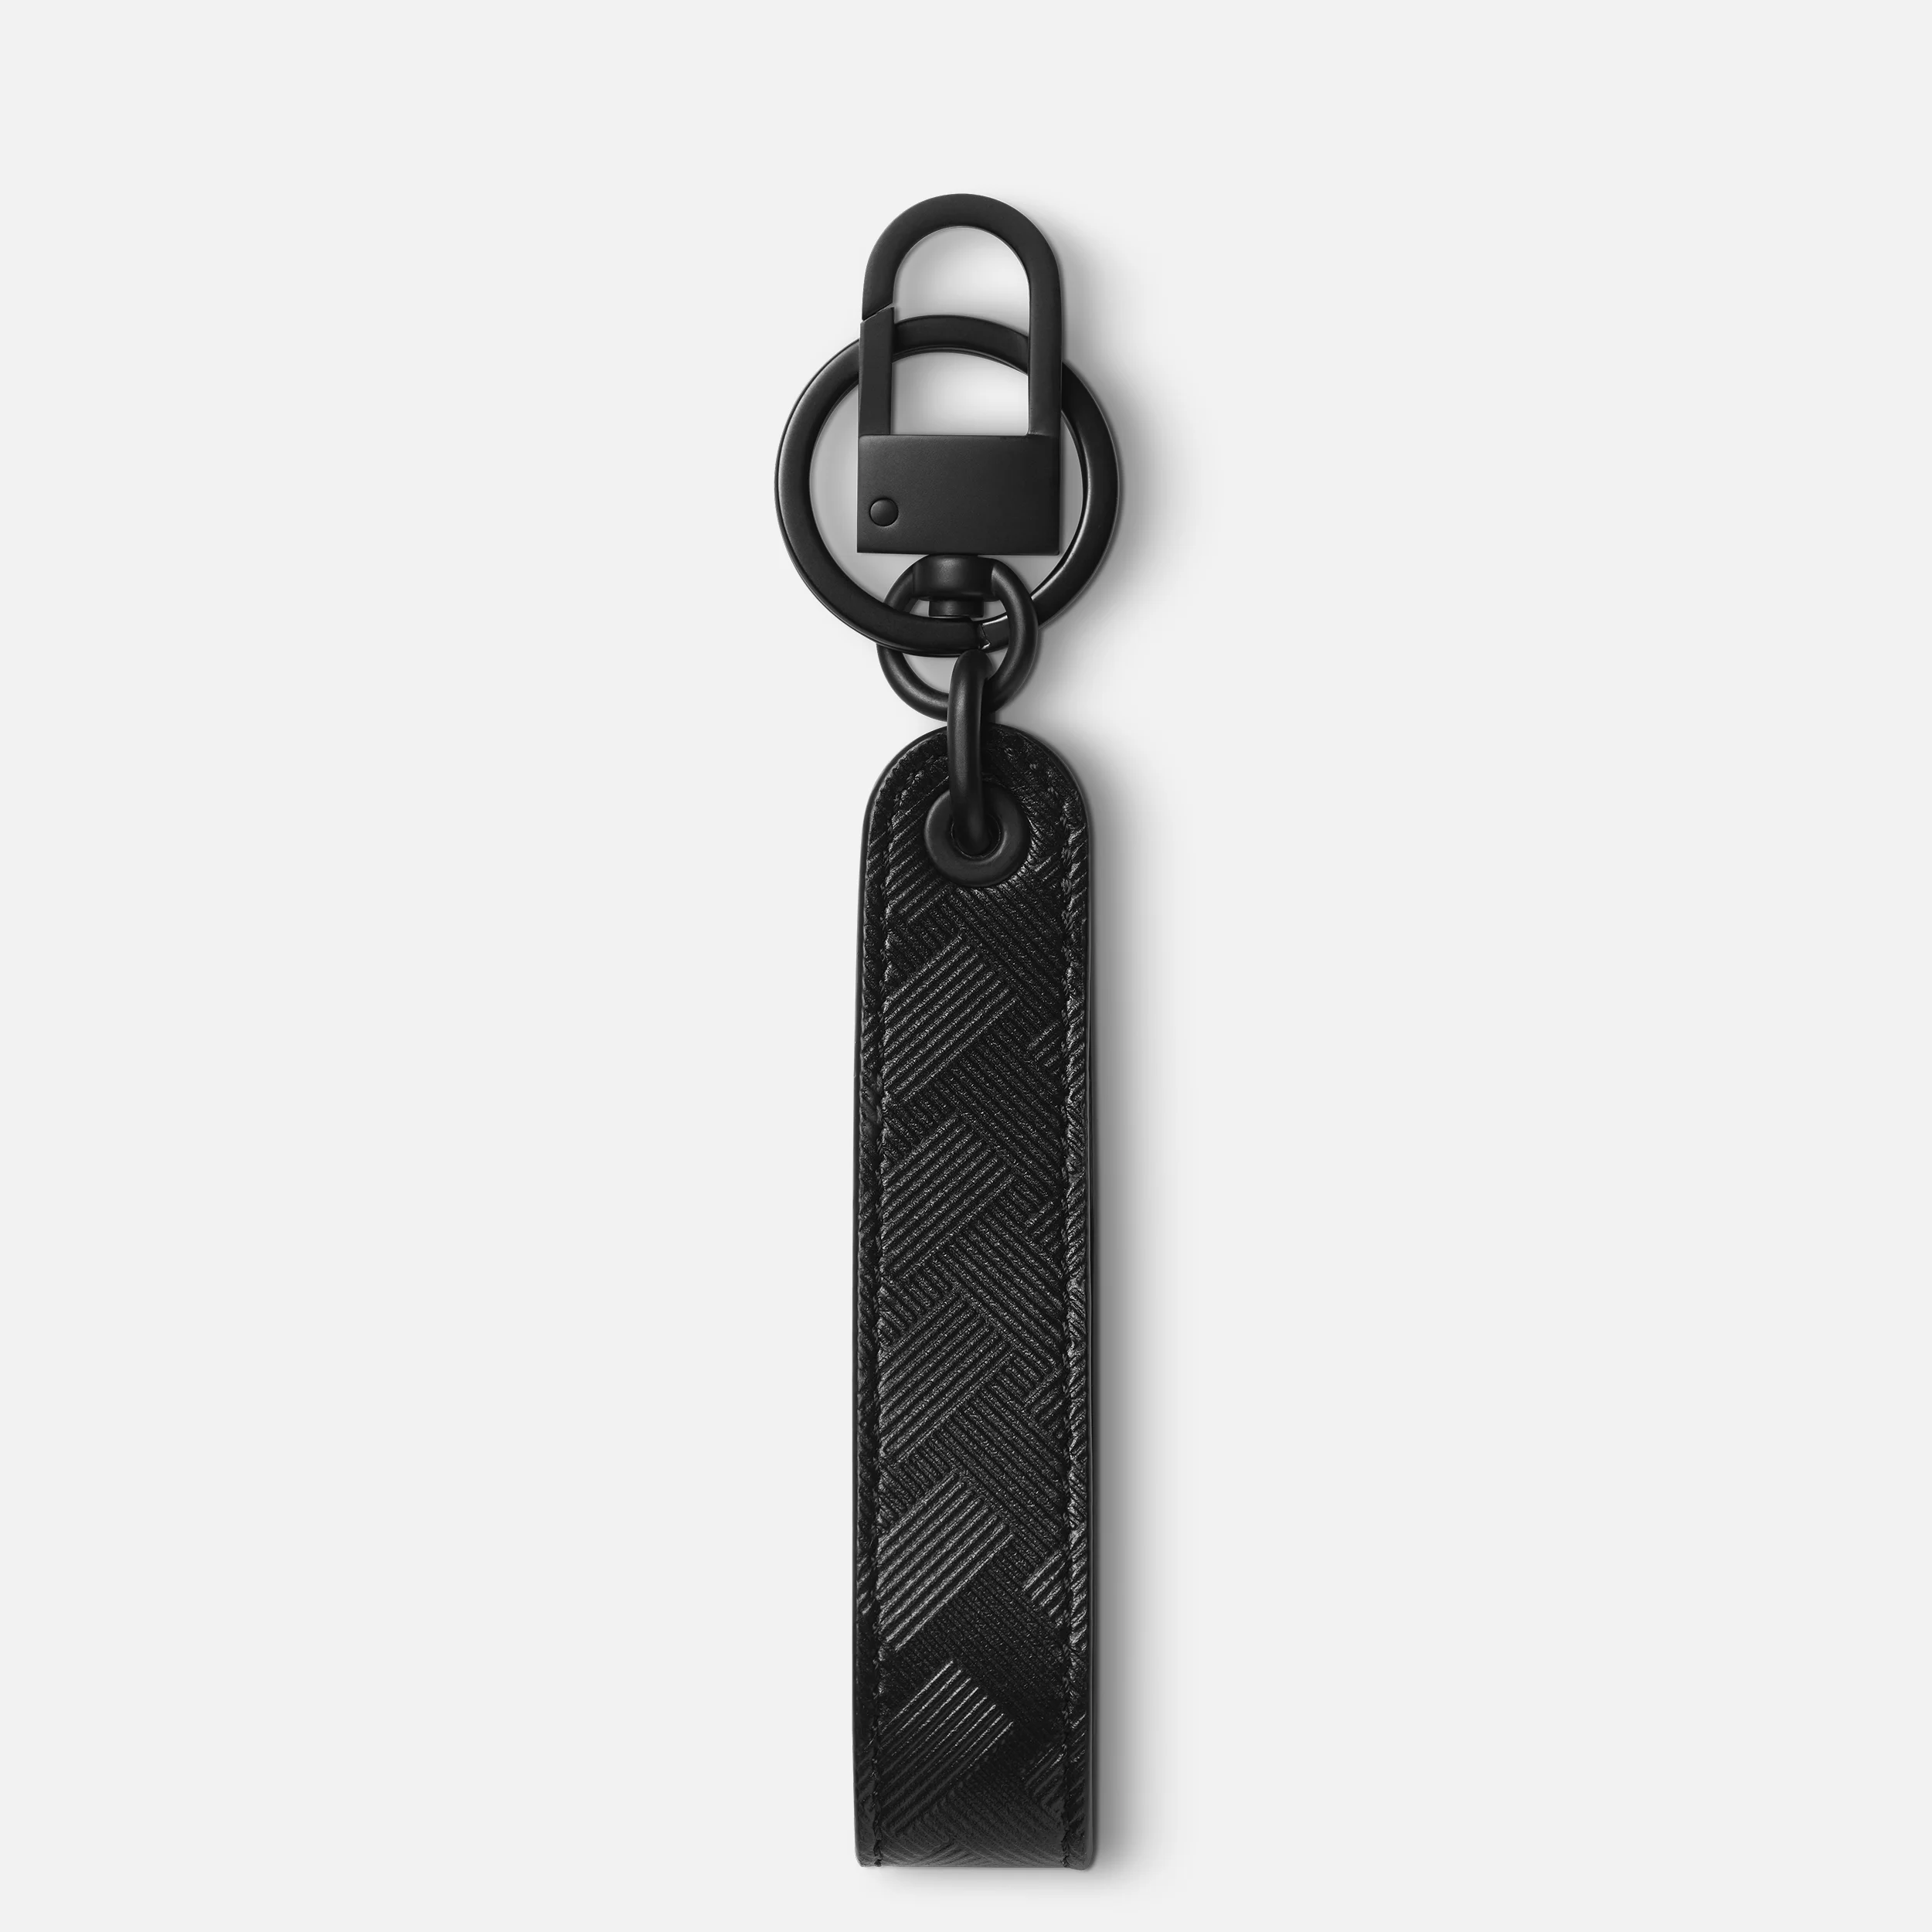 Montblanc Extreme 3.0 Key Fob - Pencraft the boutique